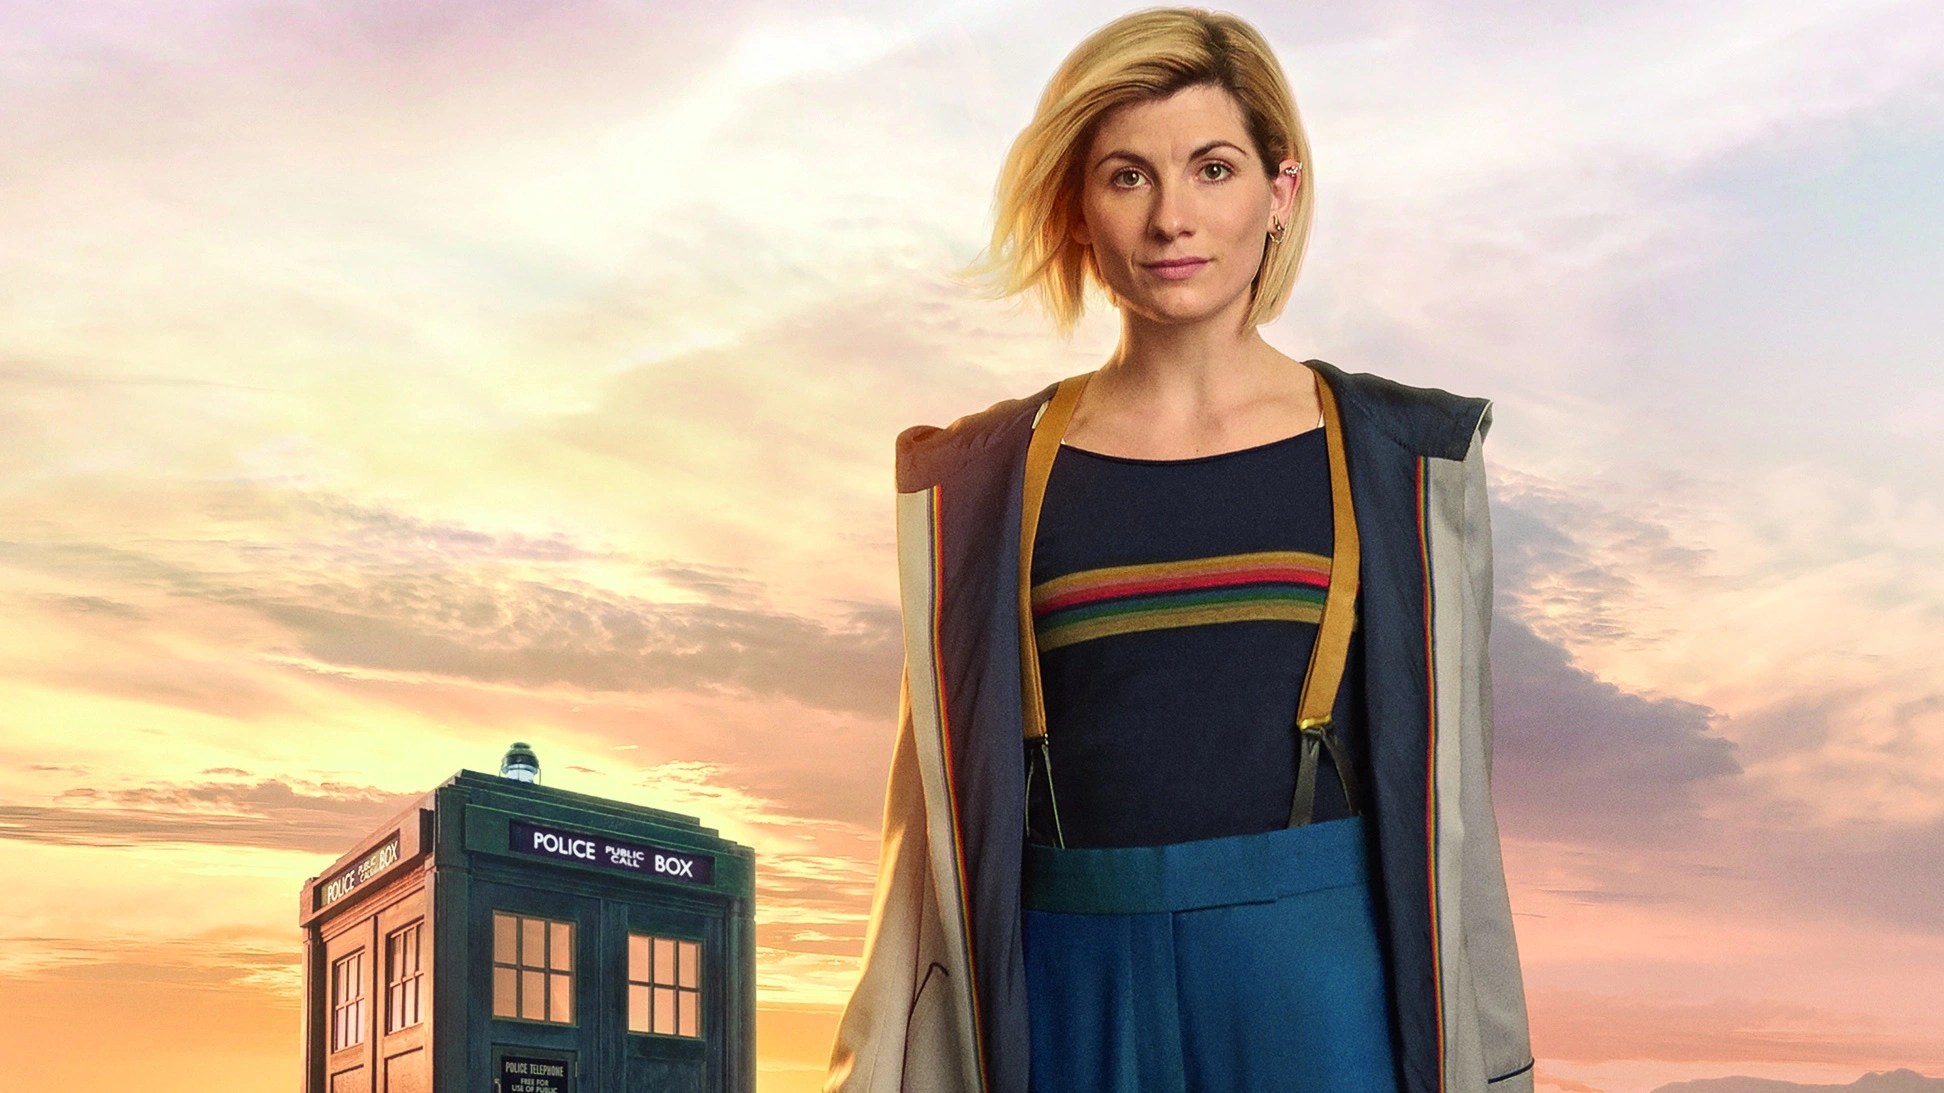 BBC Hits Back At Complaints About Transgender 'Doctor Who